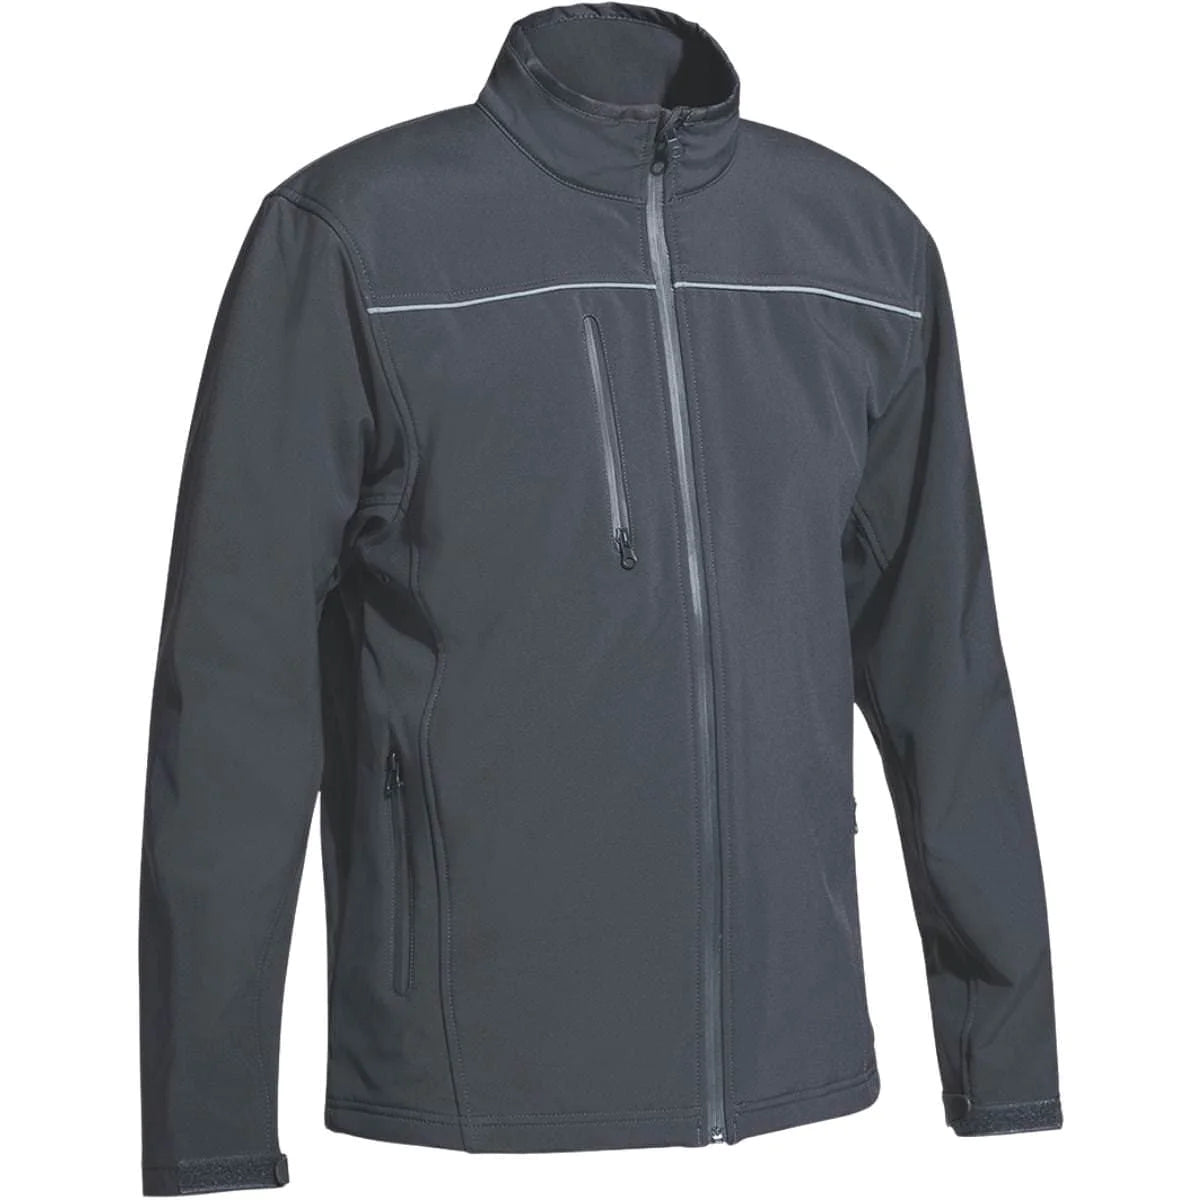 BJ6060 SOFT SHELL JACKET in grey